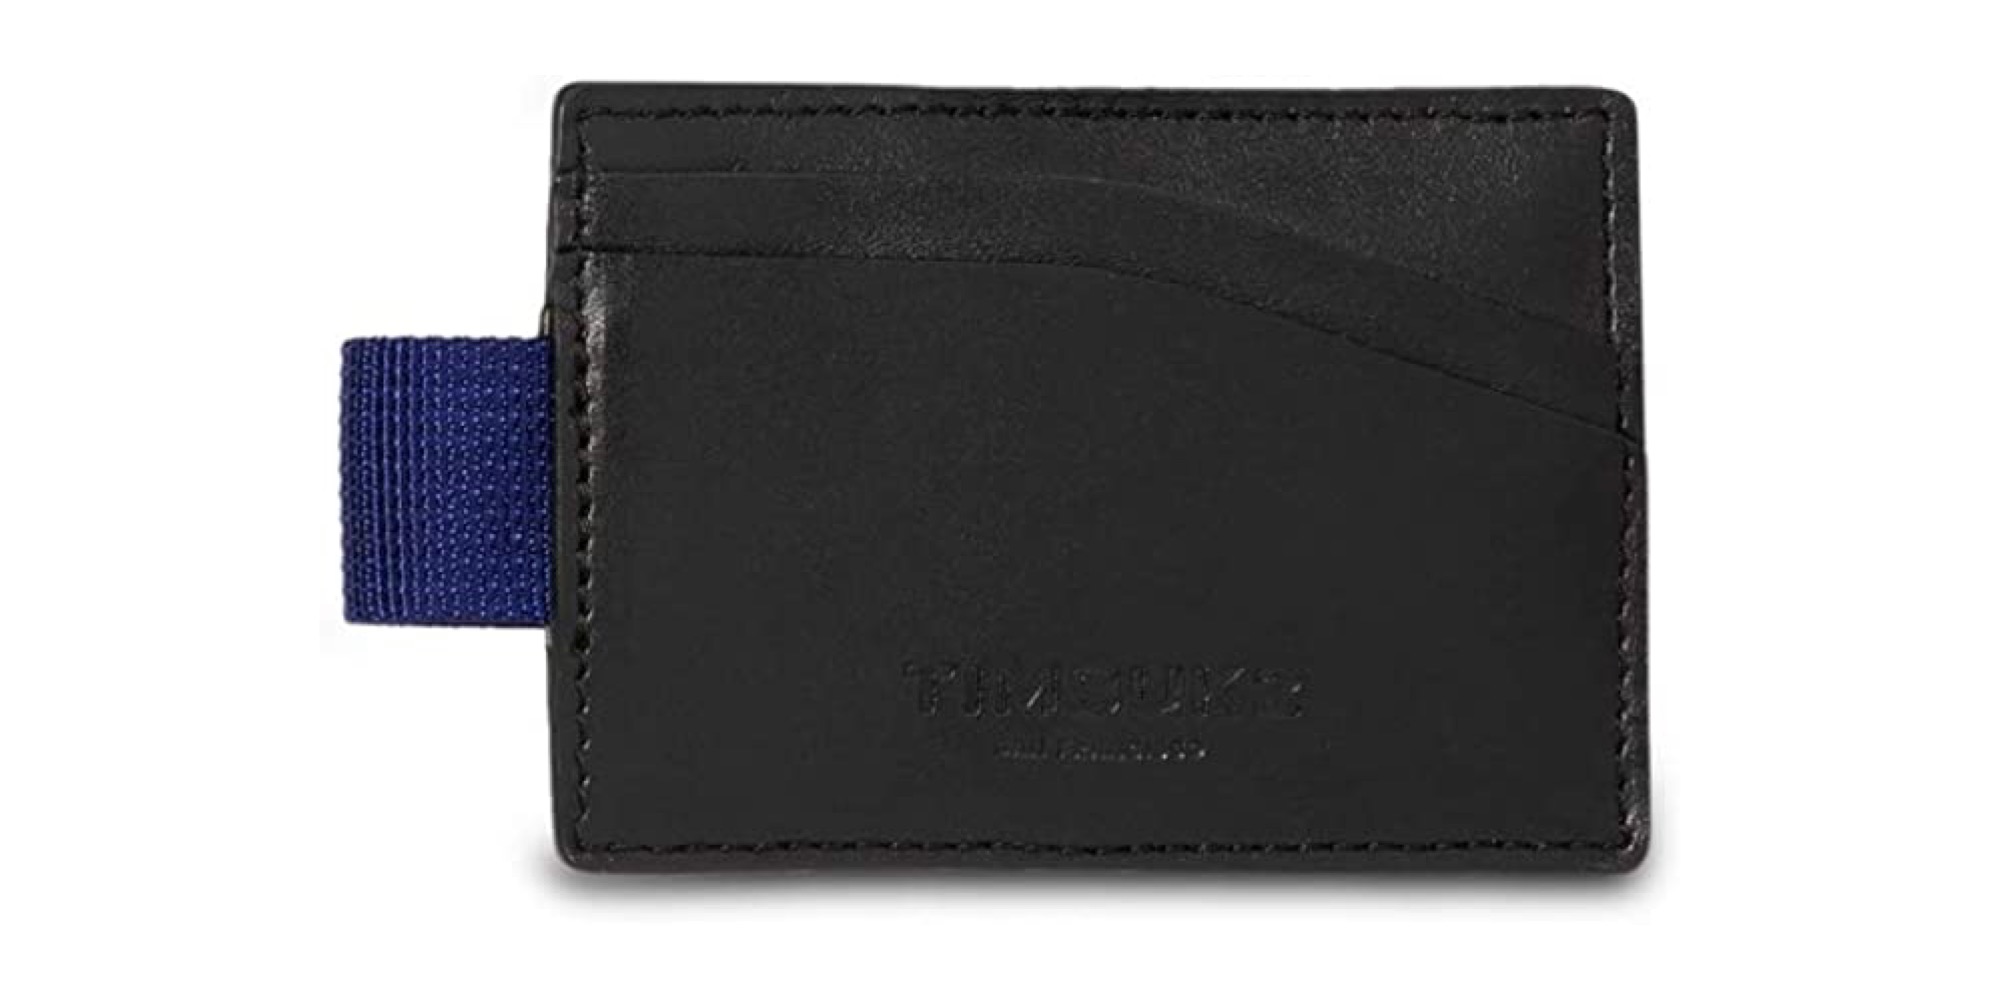 Timbuk2 Road Trip Wallet can crack open a beer: $9 (Save 64%)